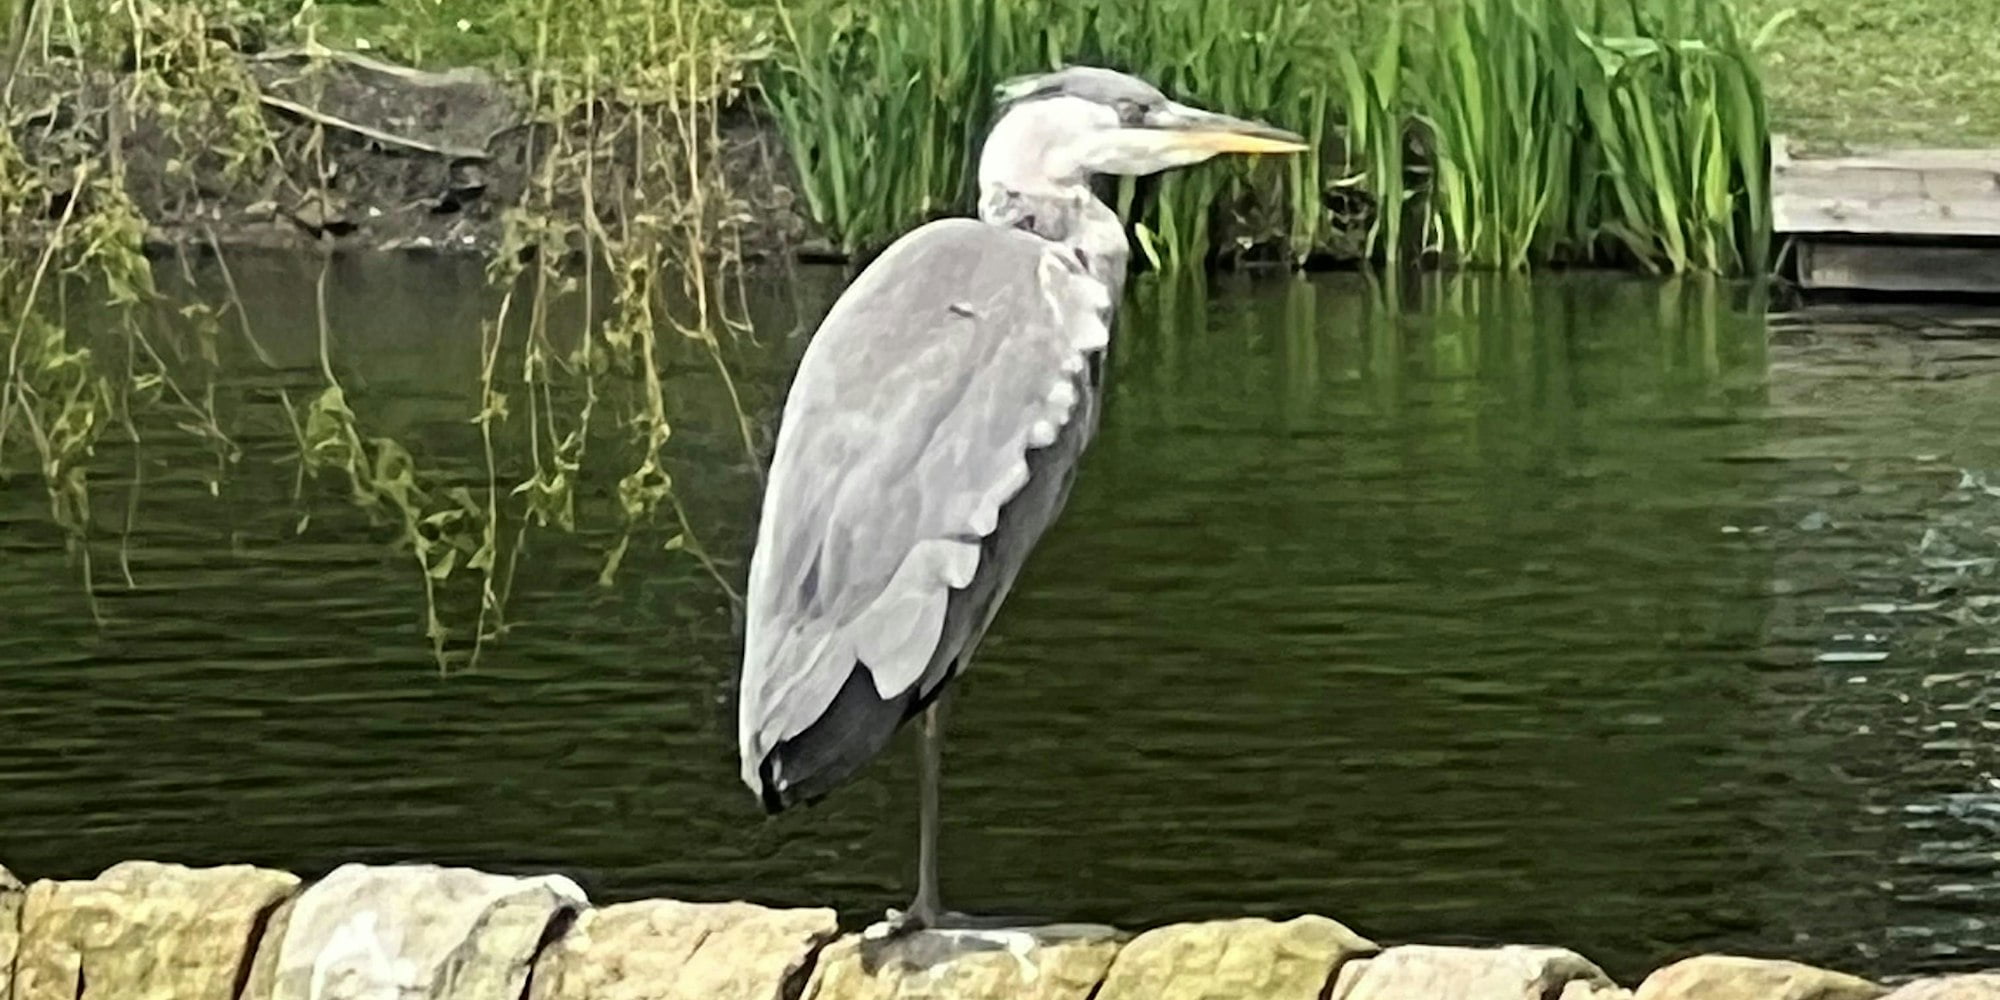 Photograph of a grey heron sitting next to a pond